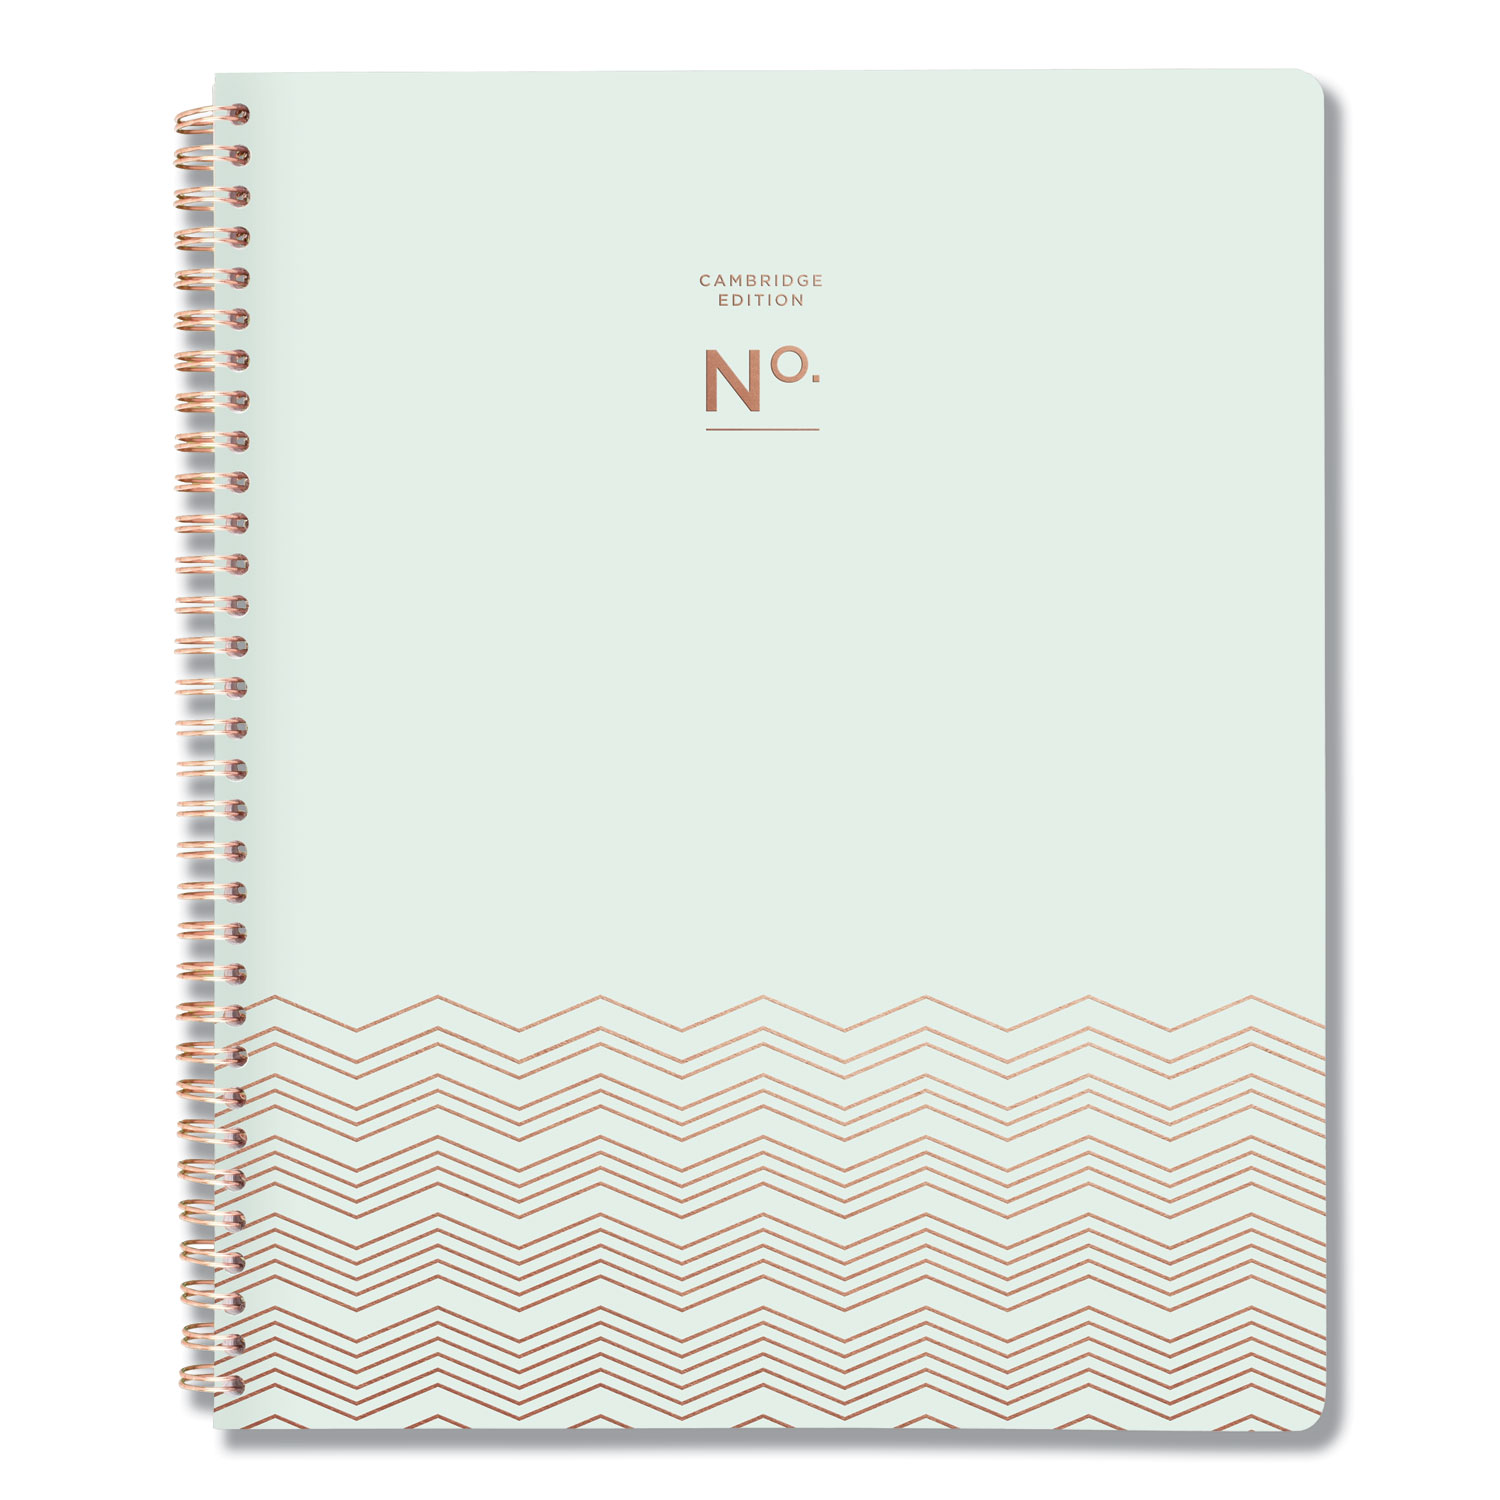  Cambridge 528090546 Workstyle Soft Cover Weekly/Monthly Planner, 11 x 8 1/2 Seafoam Cover, 2020 (AAG528090546) 